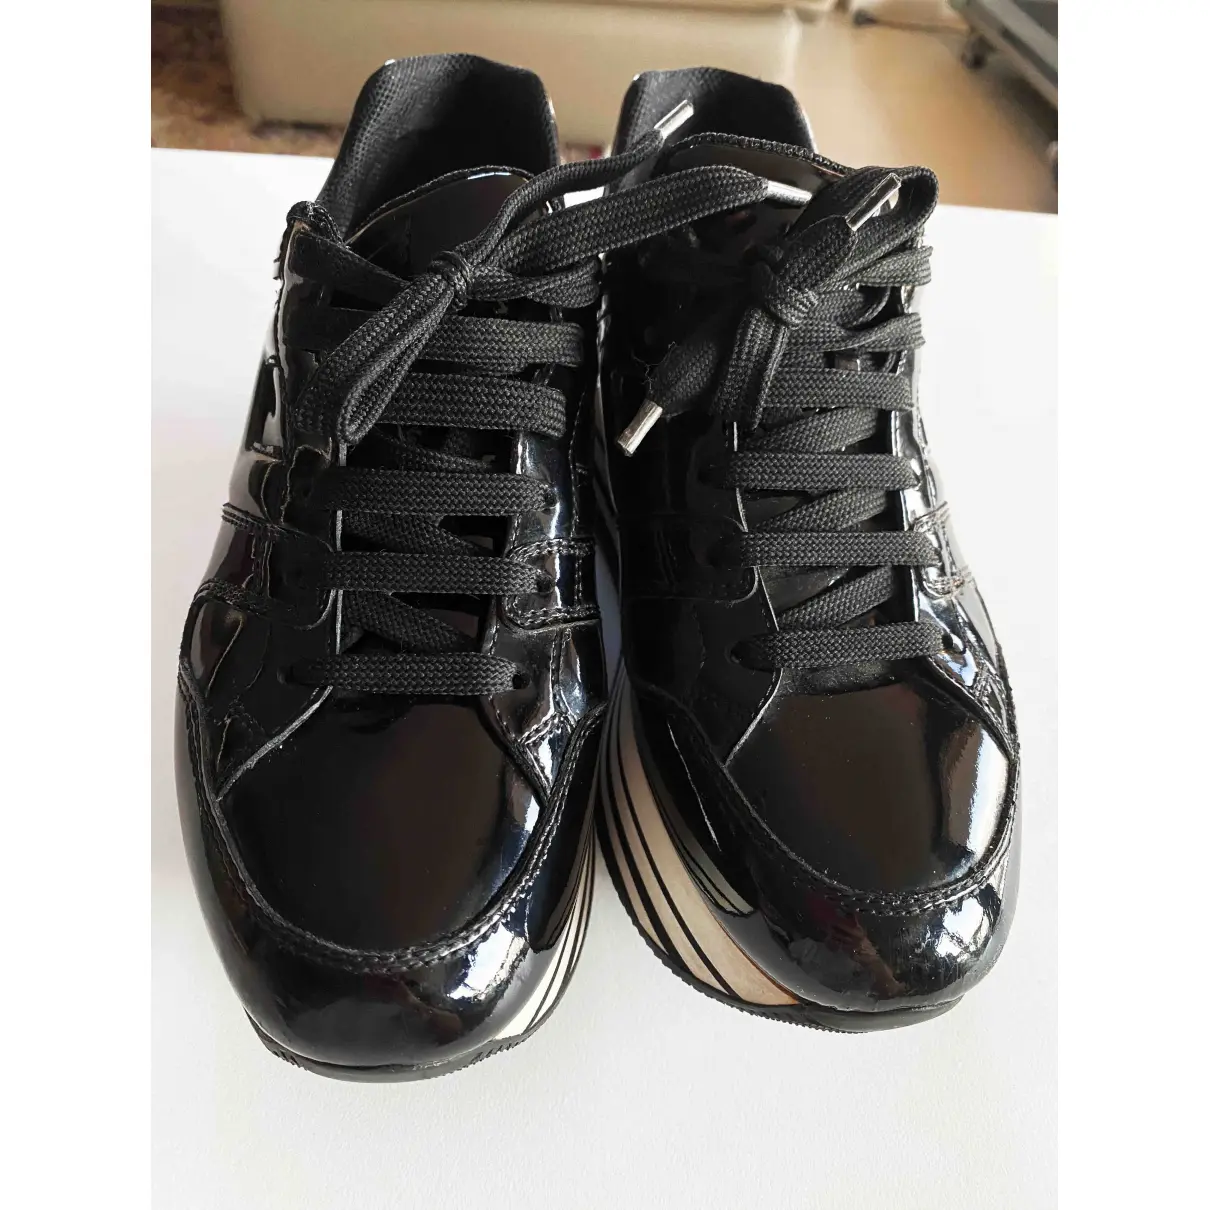 Buy Hogan Patent leather trainers online